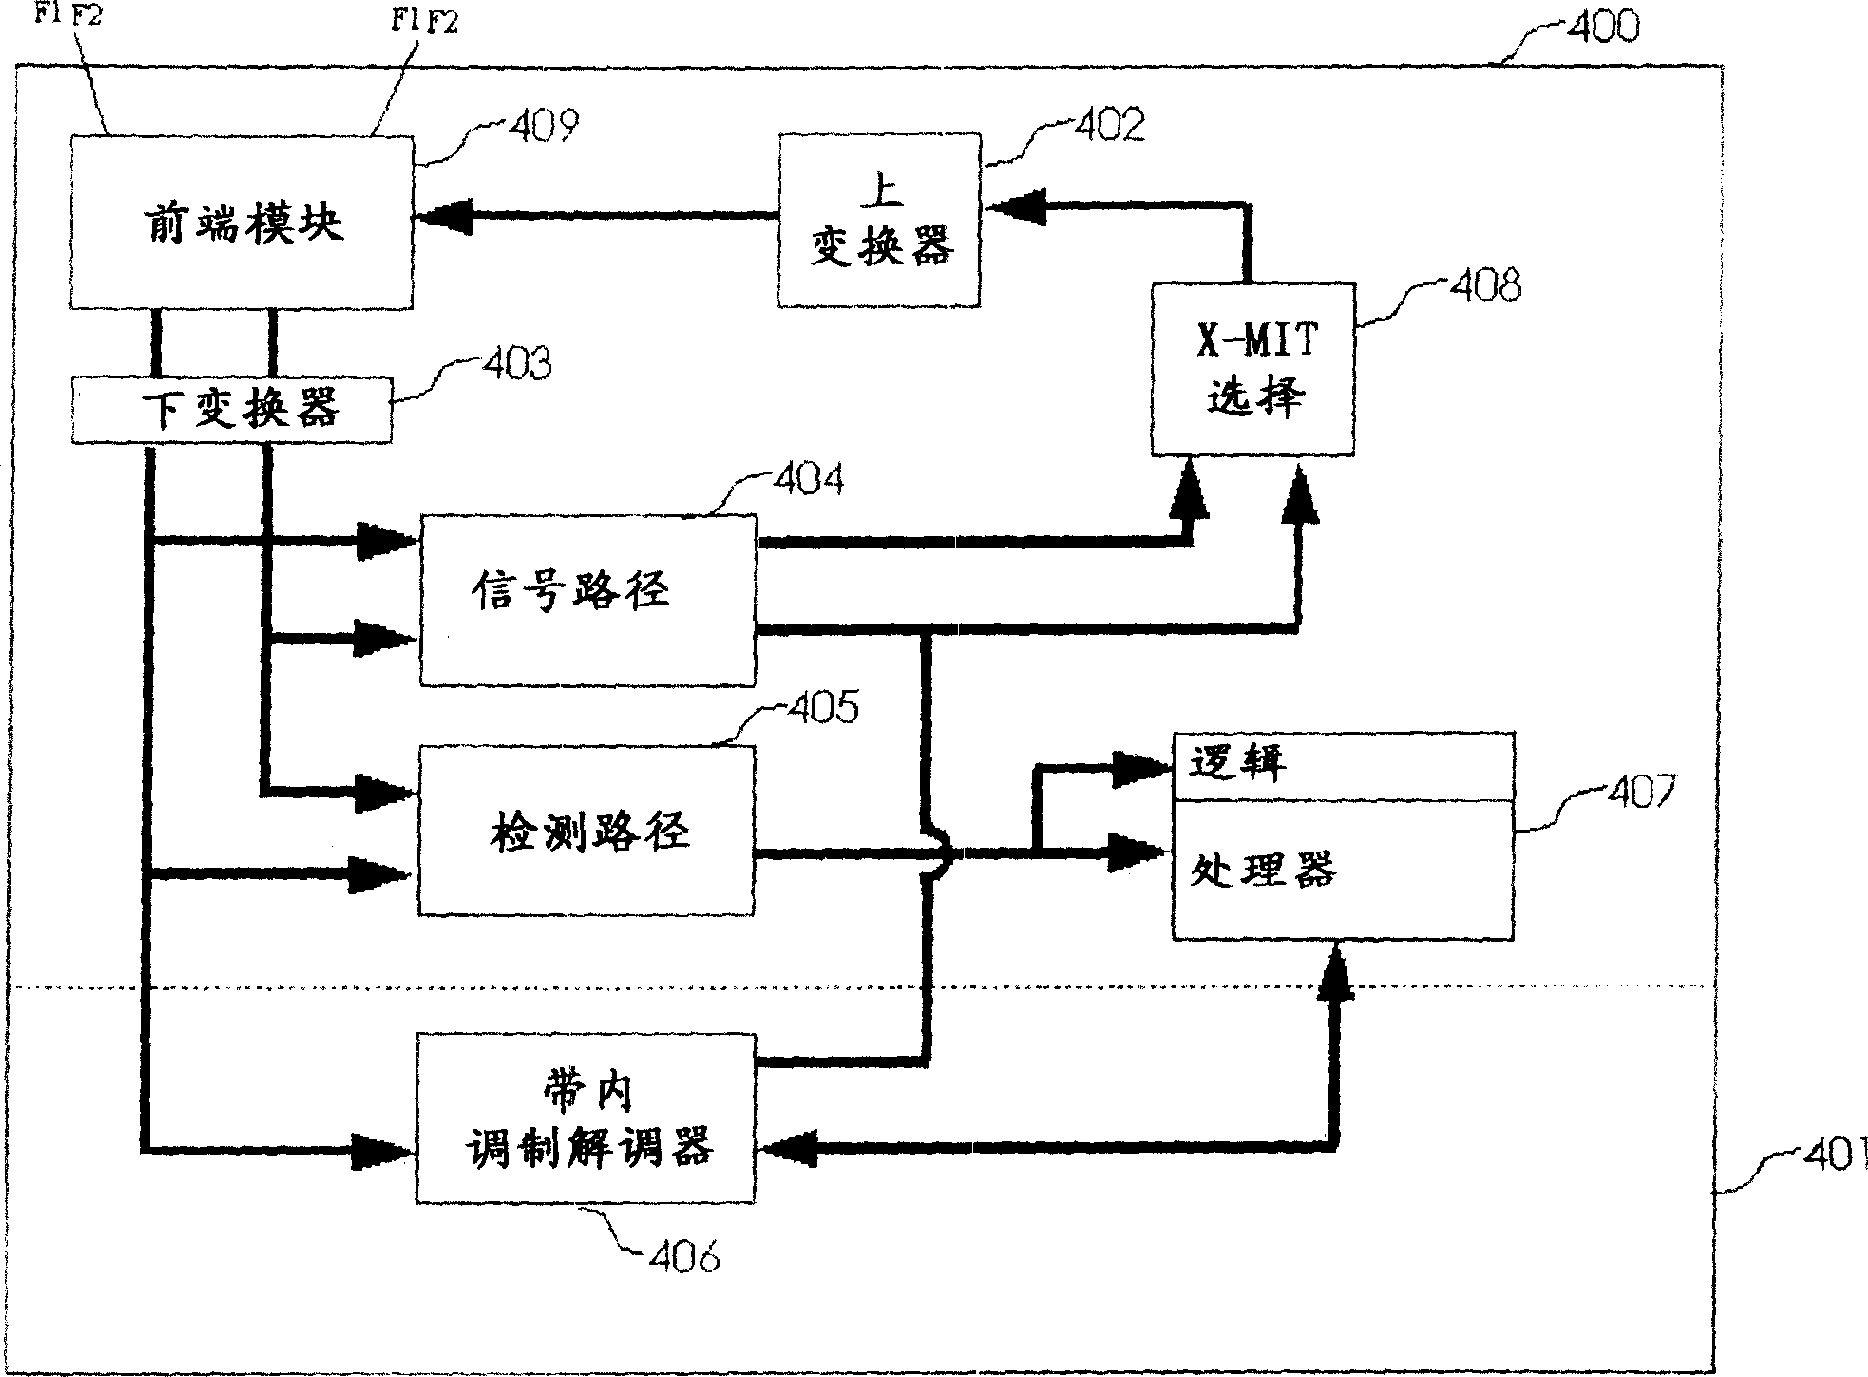 Wireless local area network repeater with in-band control channel